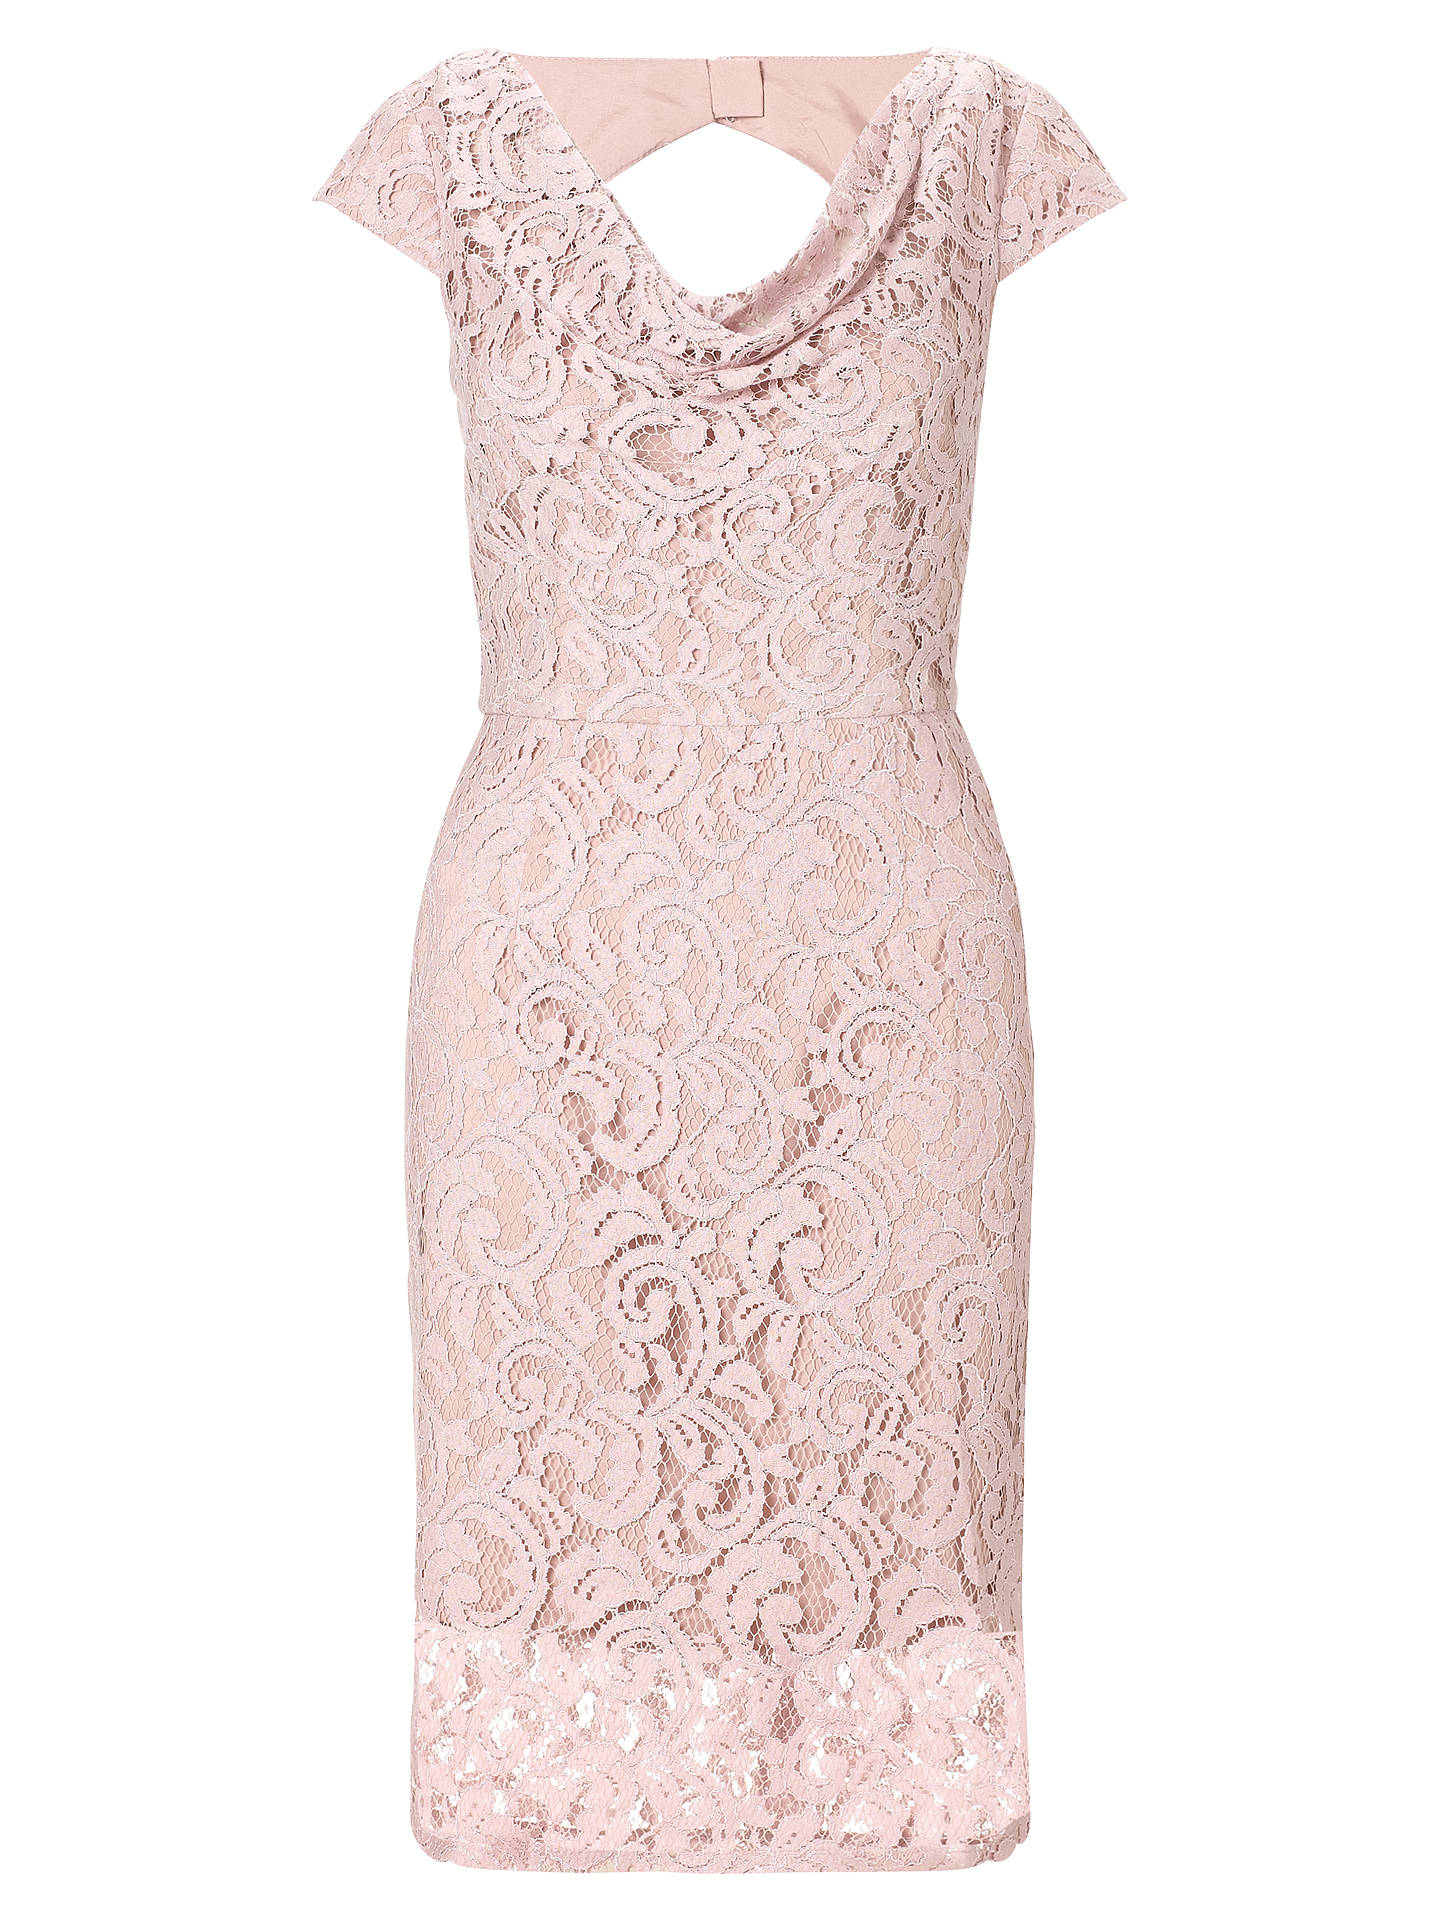 Adrianna Papell Illusion Lace Dress, Putty at John Lewis & Partners